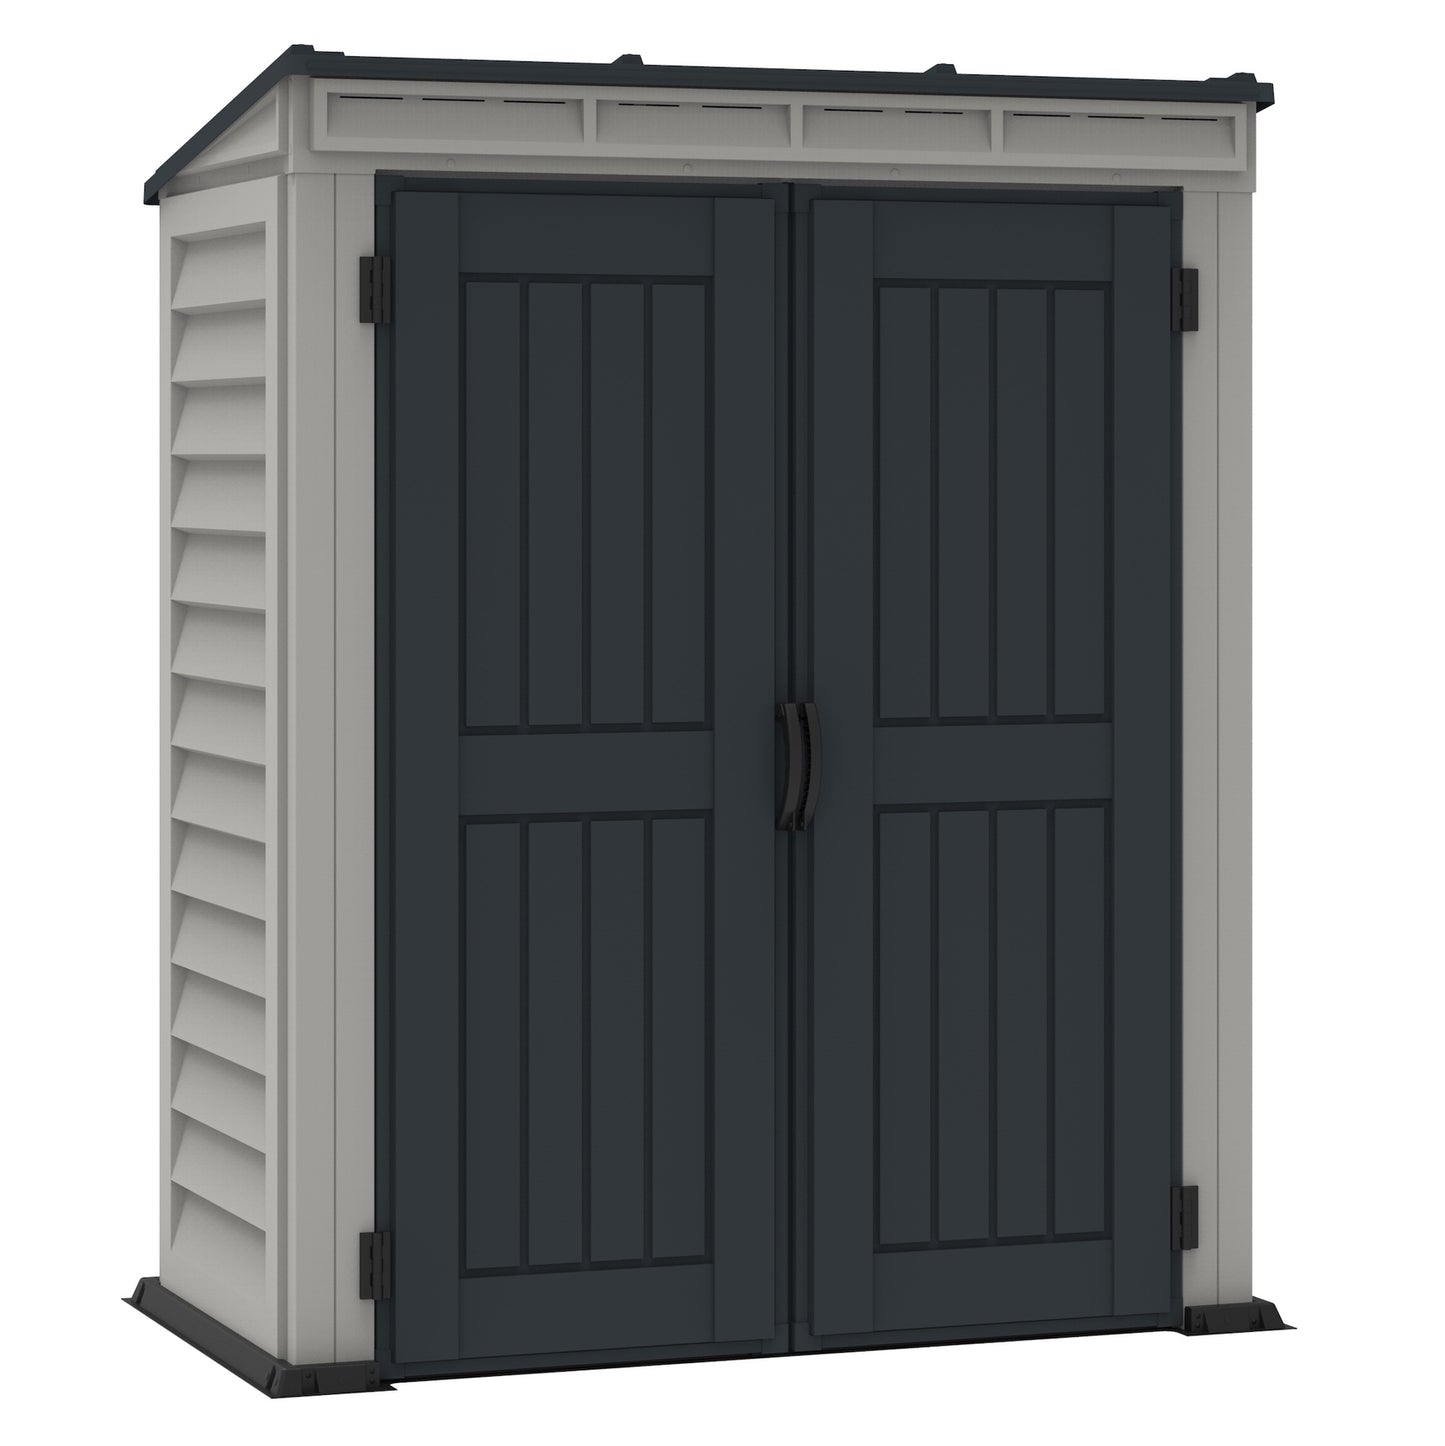 Duramax YardMate Plus Pent 5 ft. 6 in. x 3 ft. Gray Vinyl Storage Shed with Molded Floor (East Coast Purchase Only)